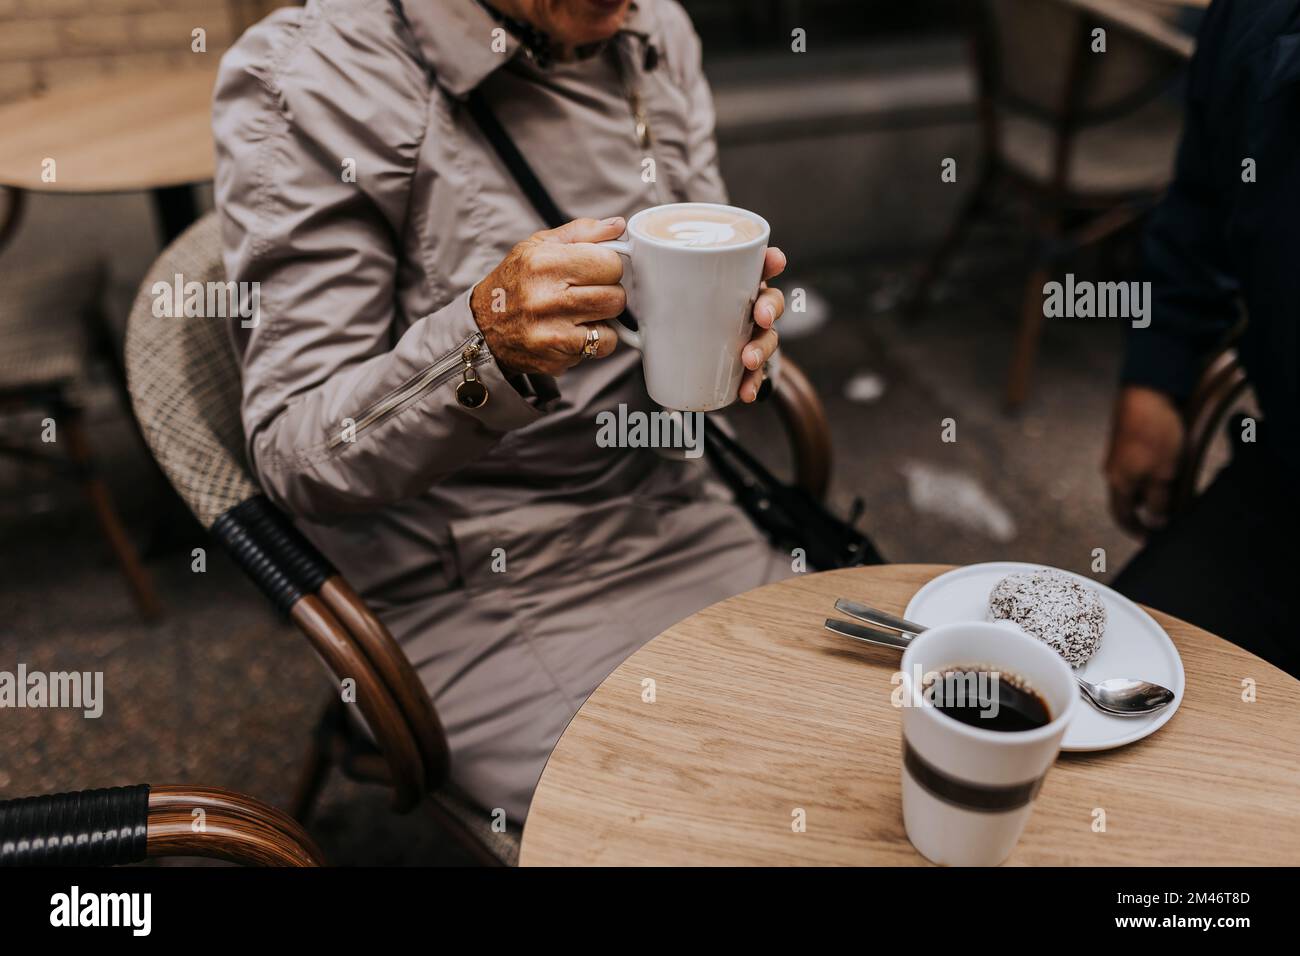 Senior woman holding Coffee cup in cafe Banque D'Images